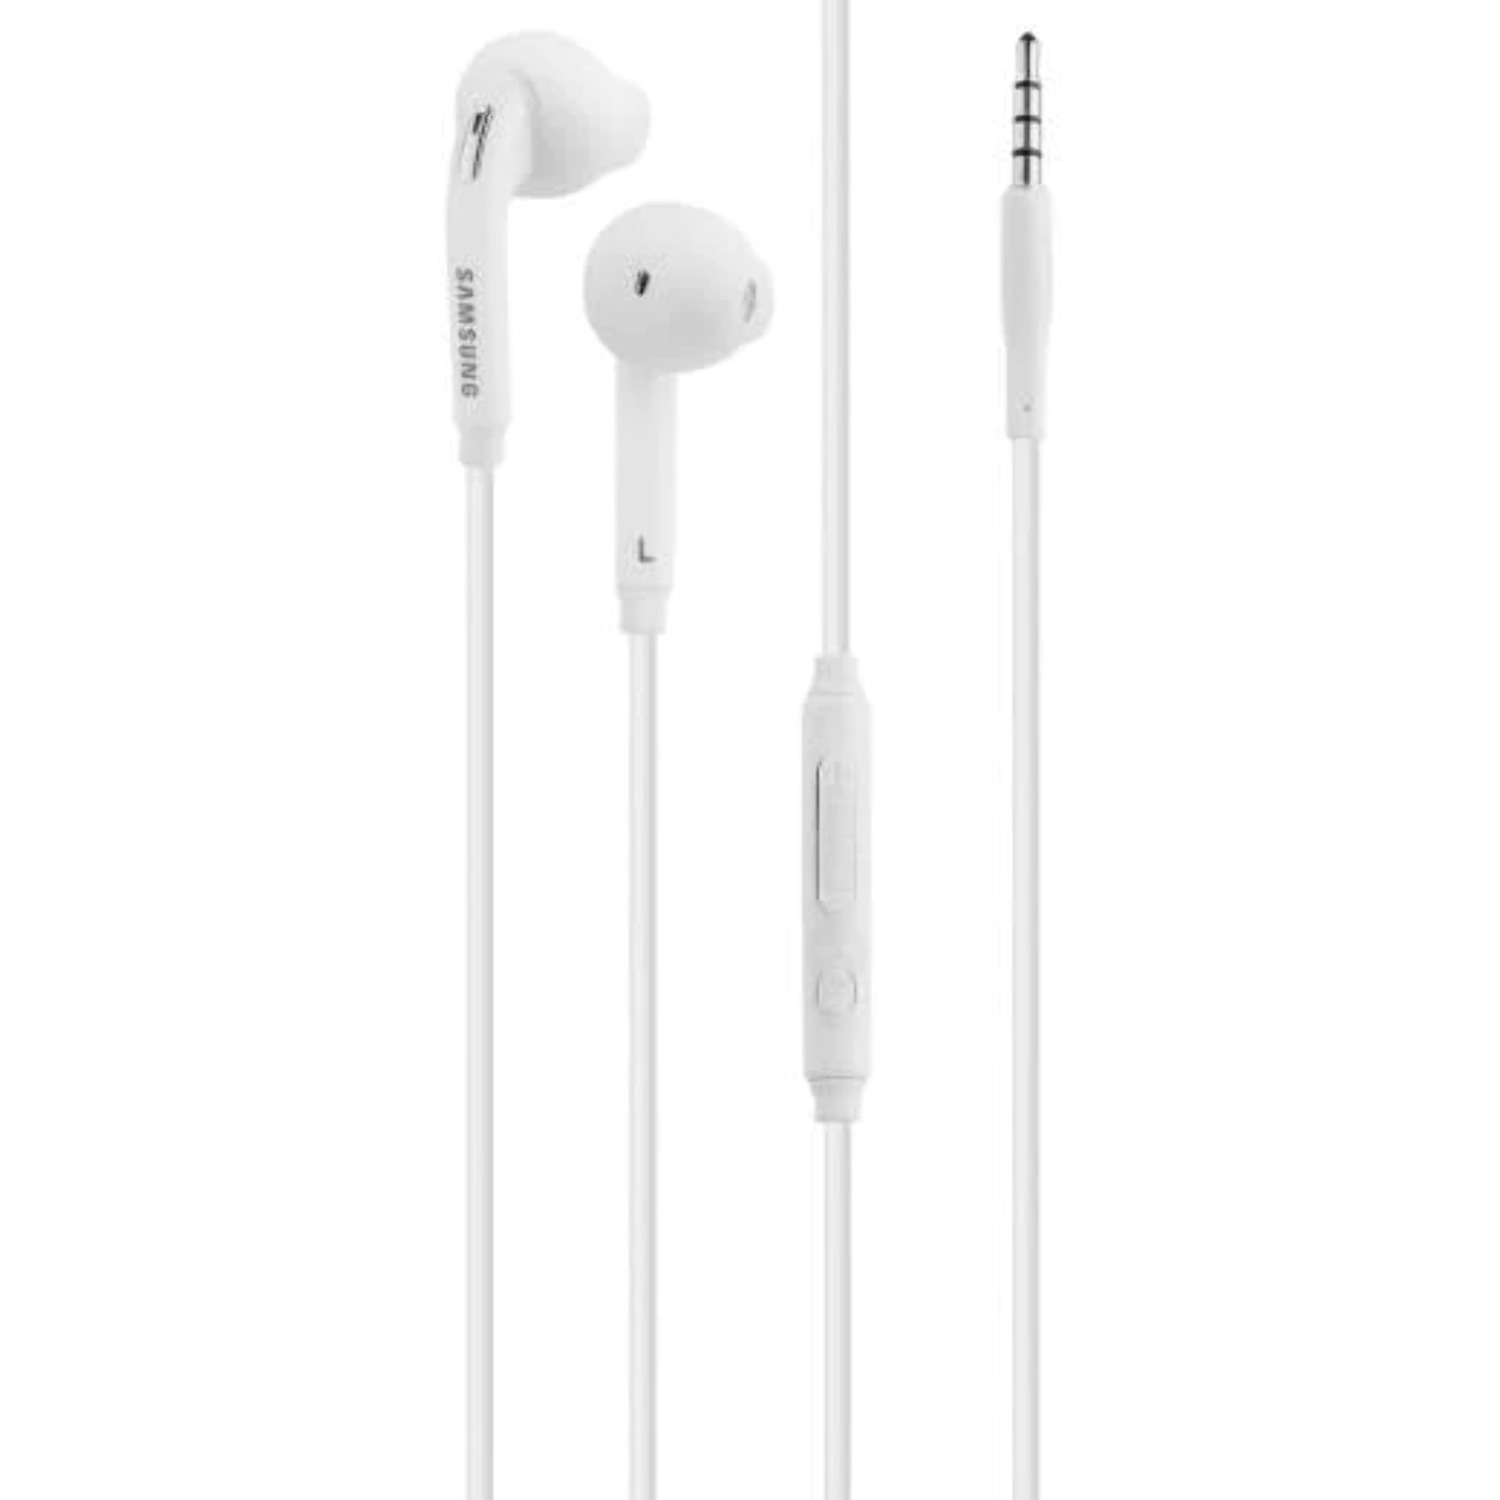 Premium Wired Headset 3.5mm Earbud Stereo In-Ear Headphones with in-line Remote & Microphone Compatible with Doro PhoneEasy 612 - image 1 of 1